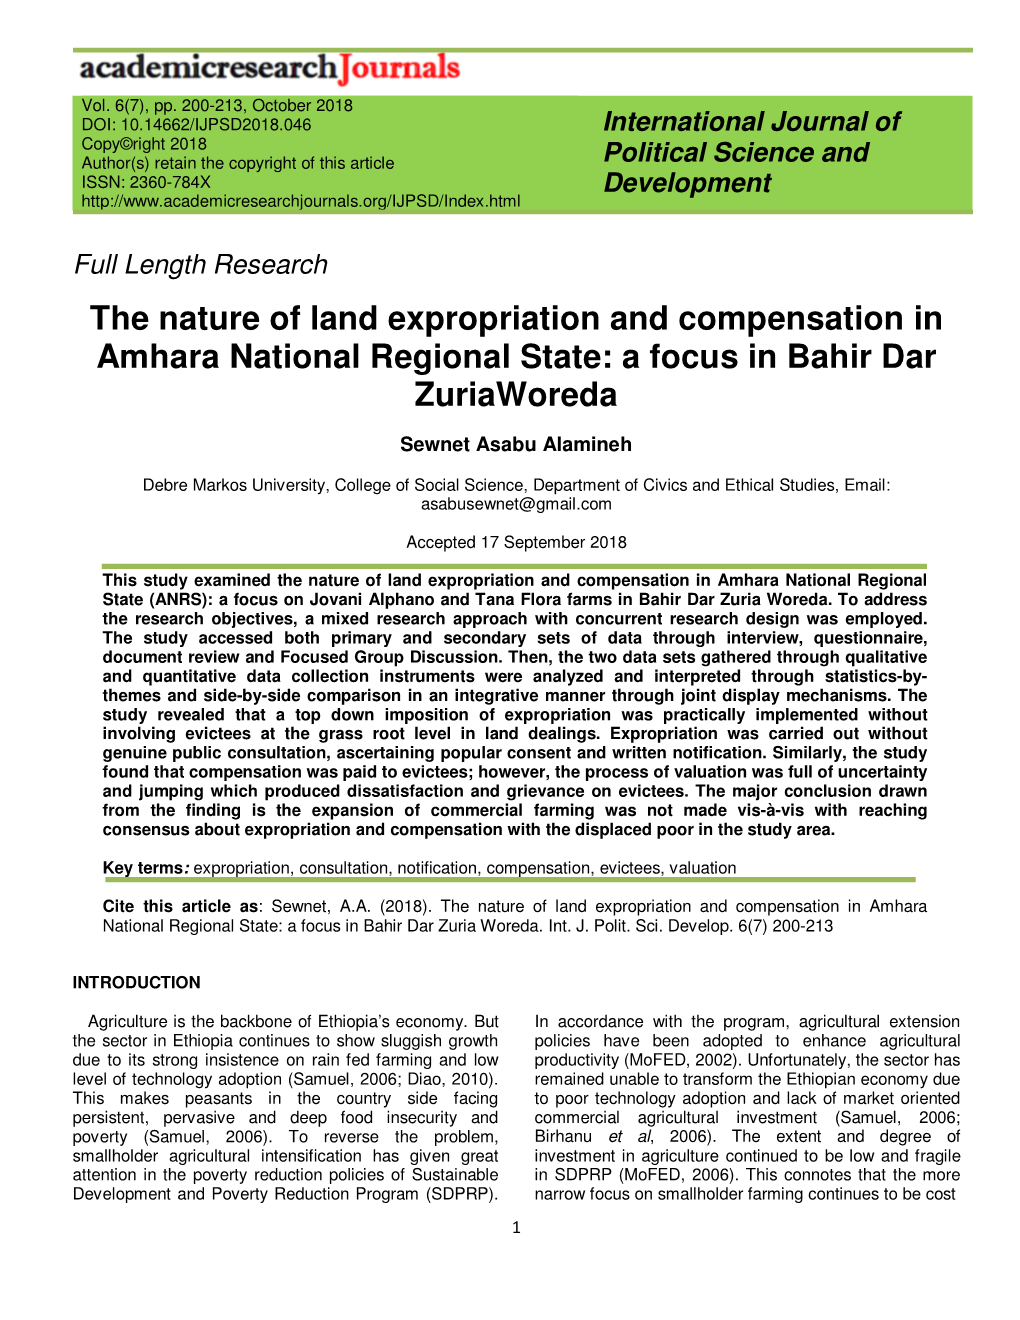 The Nature of Land Expropriation and Compensation in Amhara National Regional State: a Focus in Bahir Dar Zuriaworeda